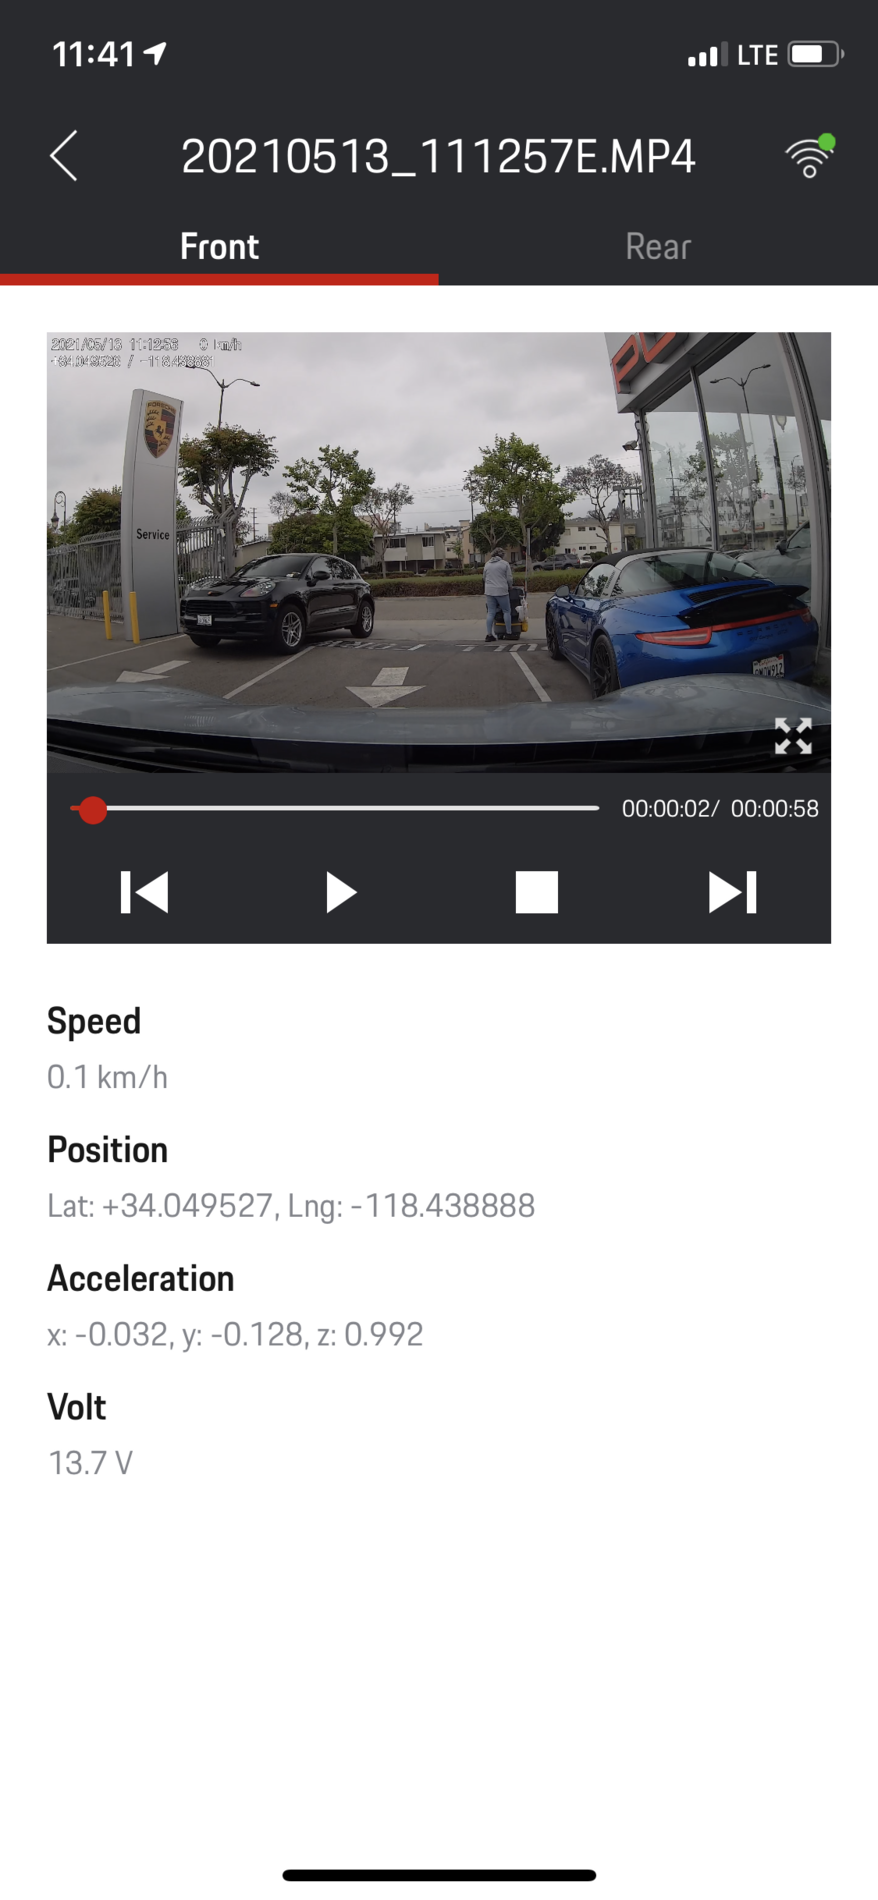 Porsche Taycan Porsche Dashcam Installed - Review and Overview for US Taycan Owners IMG_5847.PNG